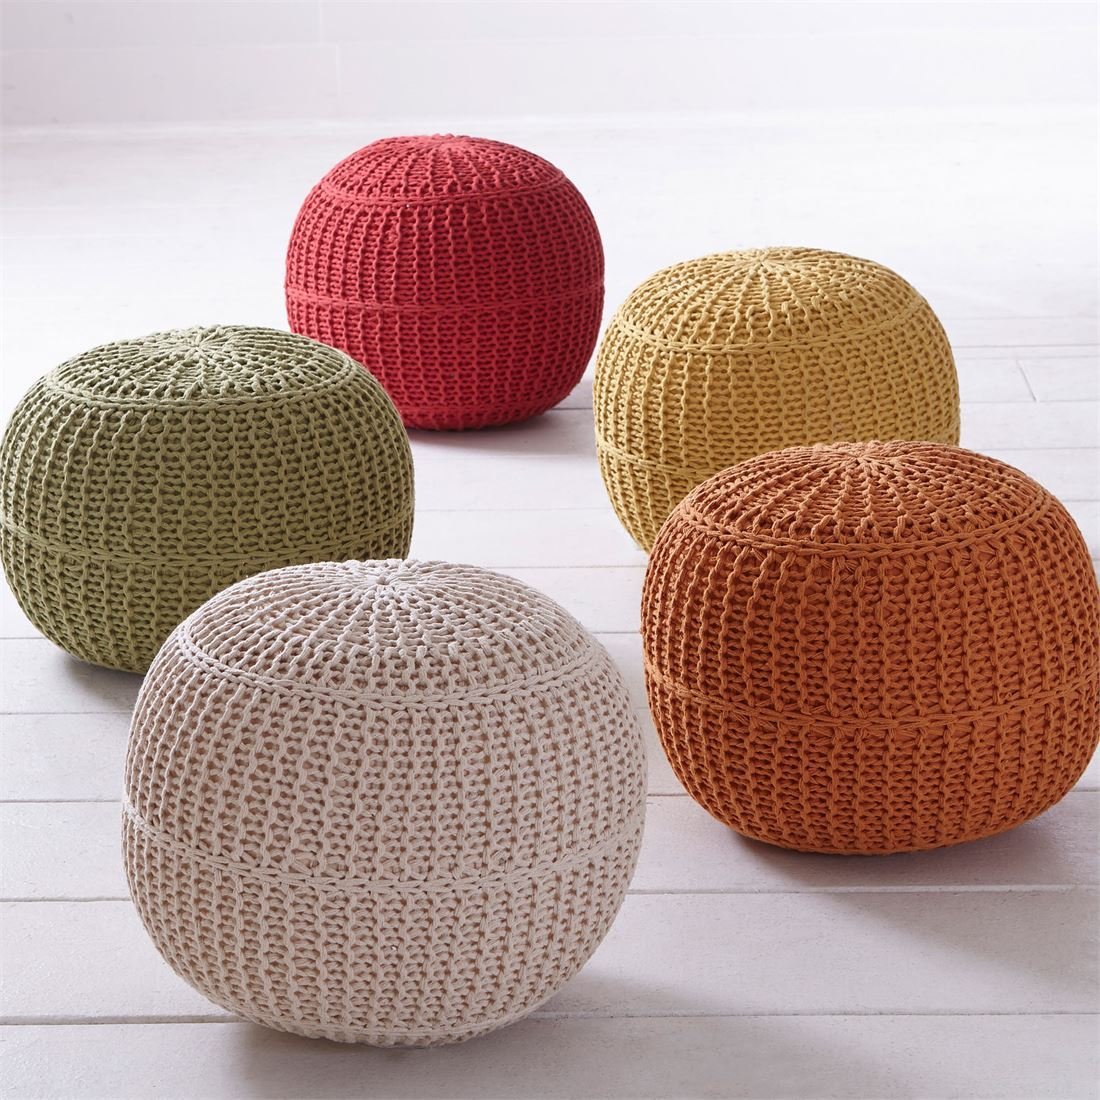 knitted pouf amazon.com: brylanehome hand-knitted ottoman pouf (red,0): kitchen u0026 dining itibems